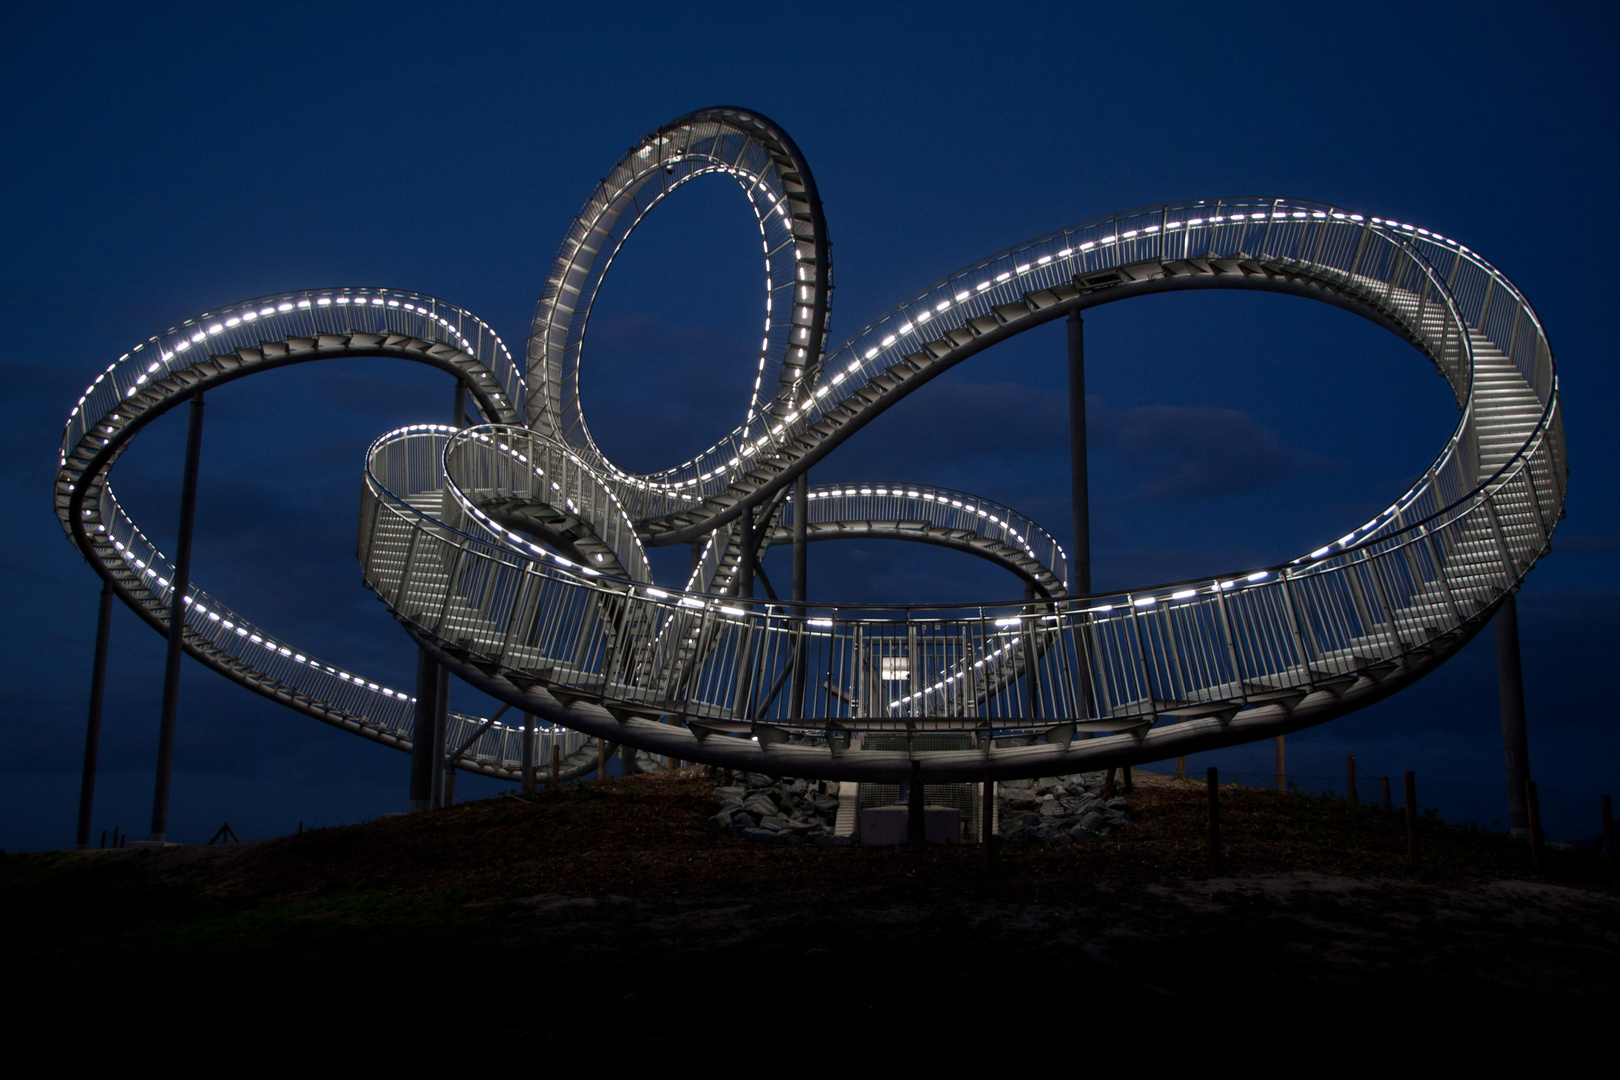 Tiger and turtle